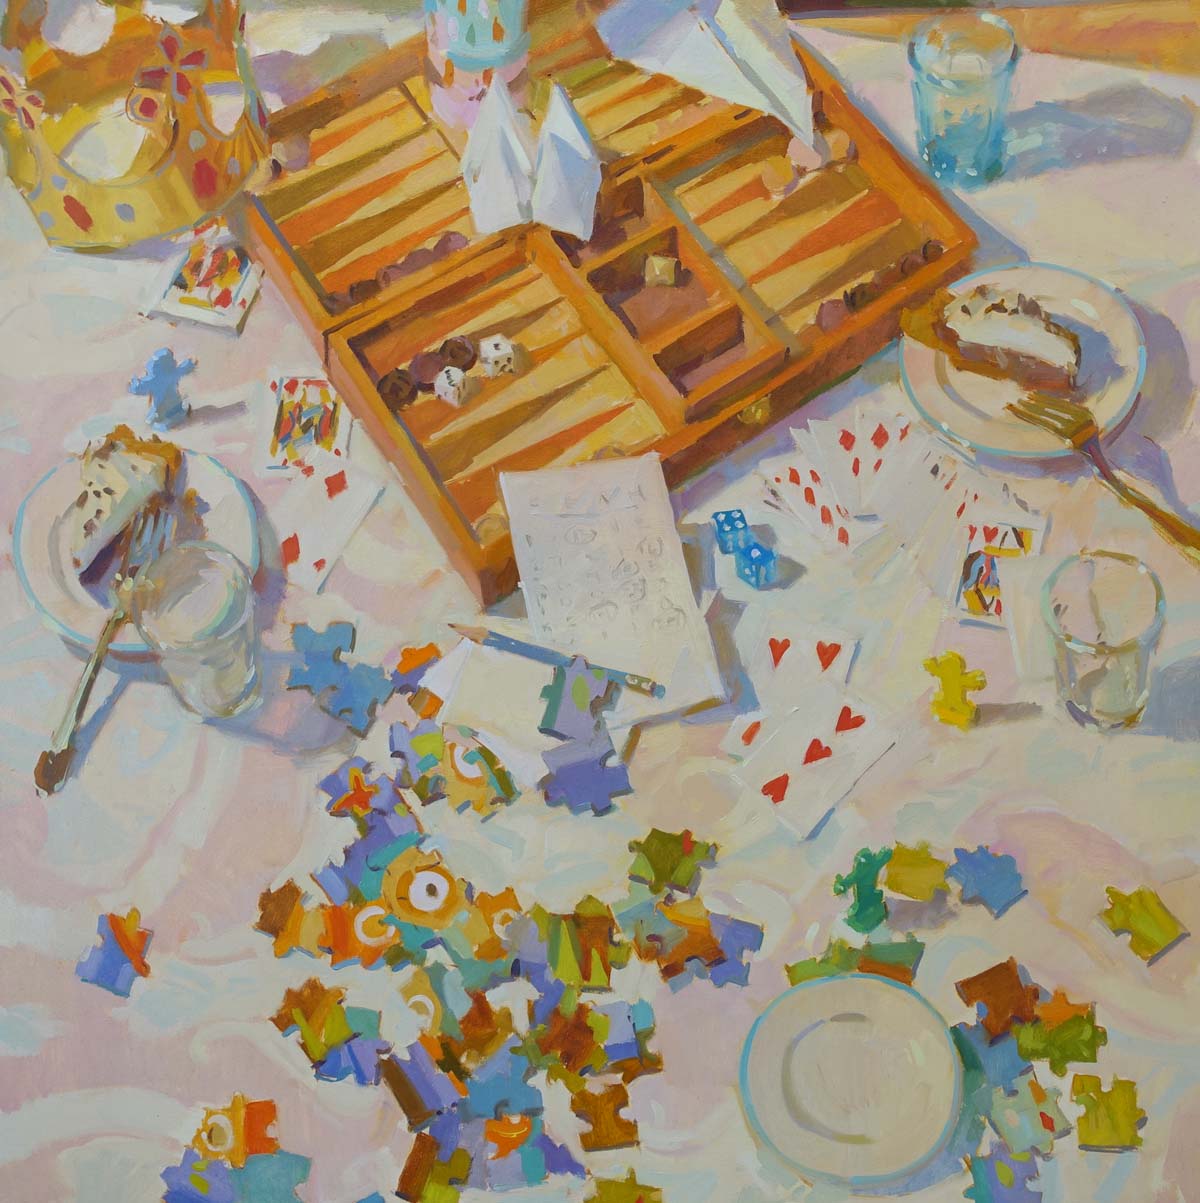  Game Night  36x36" oil on canvas    